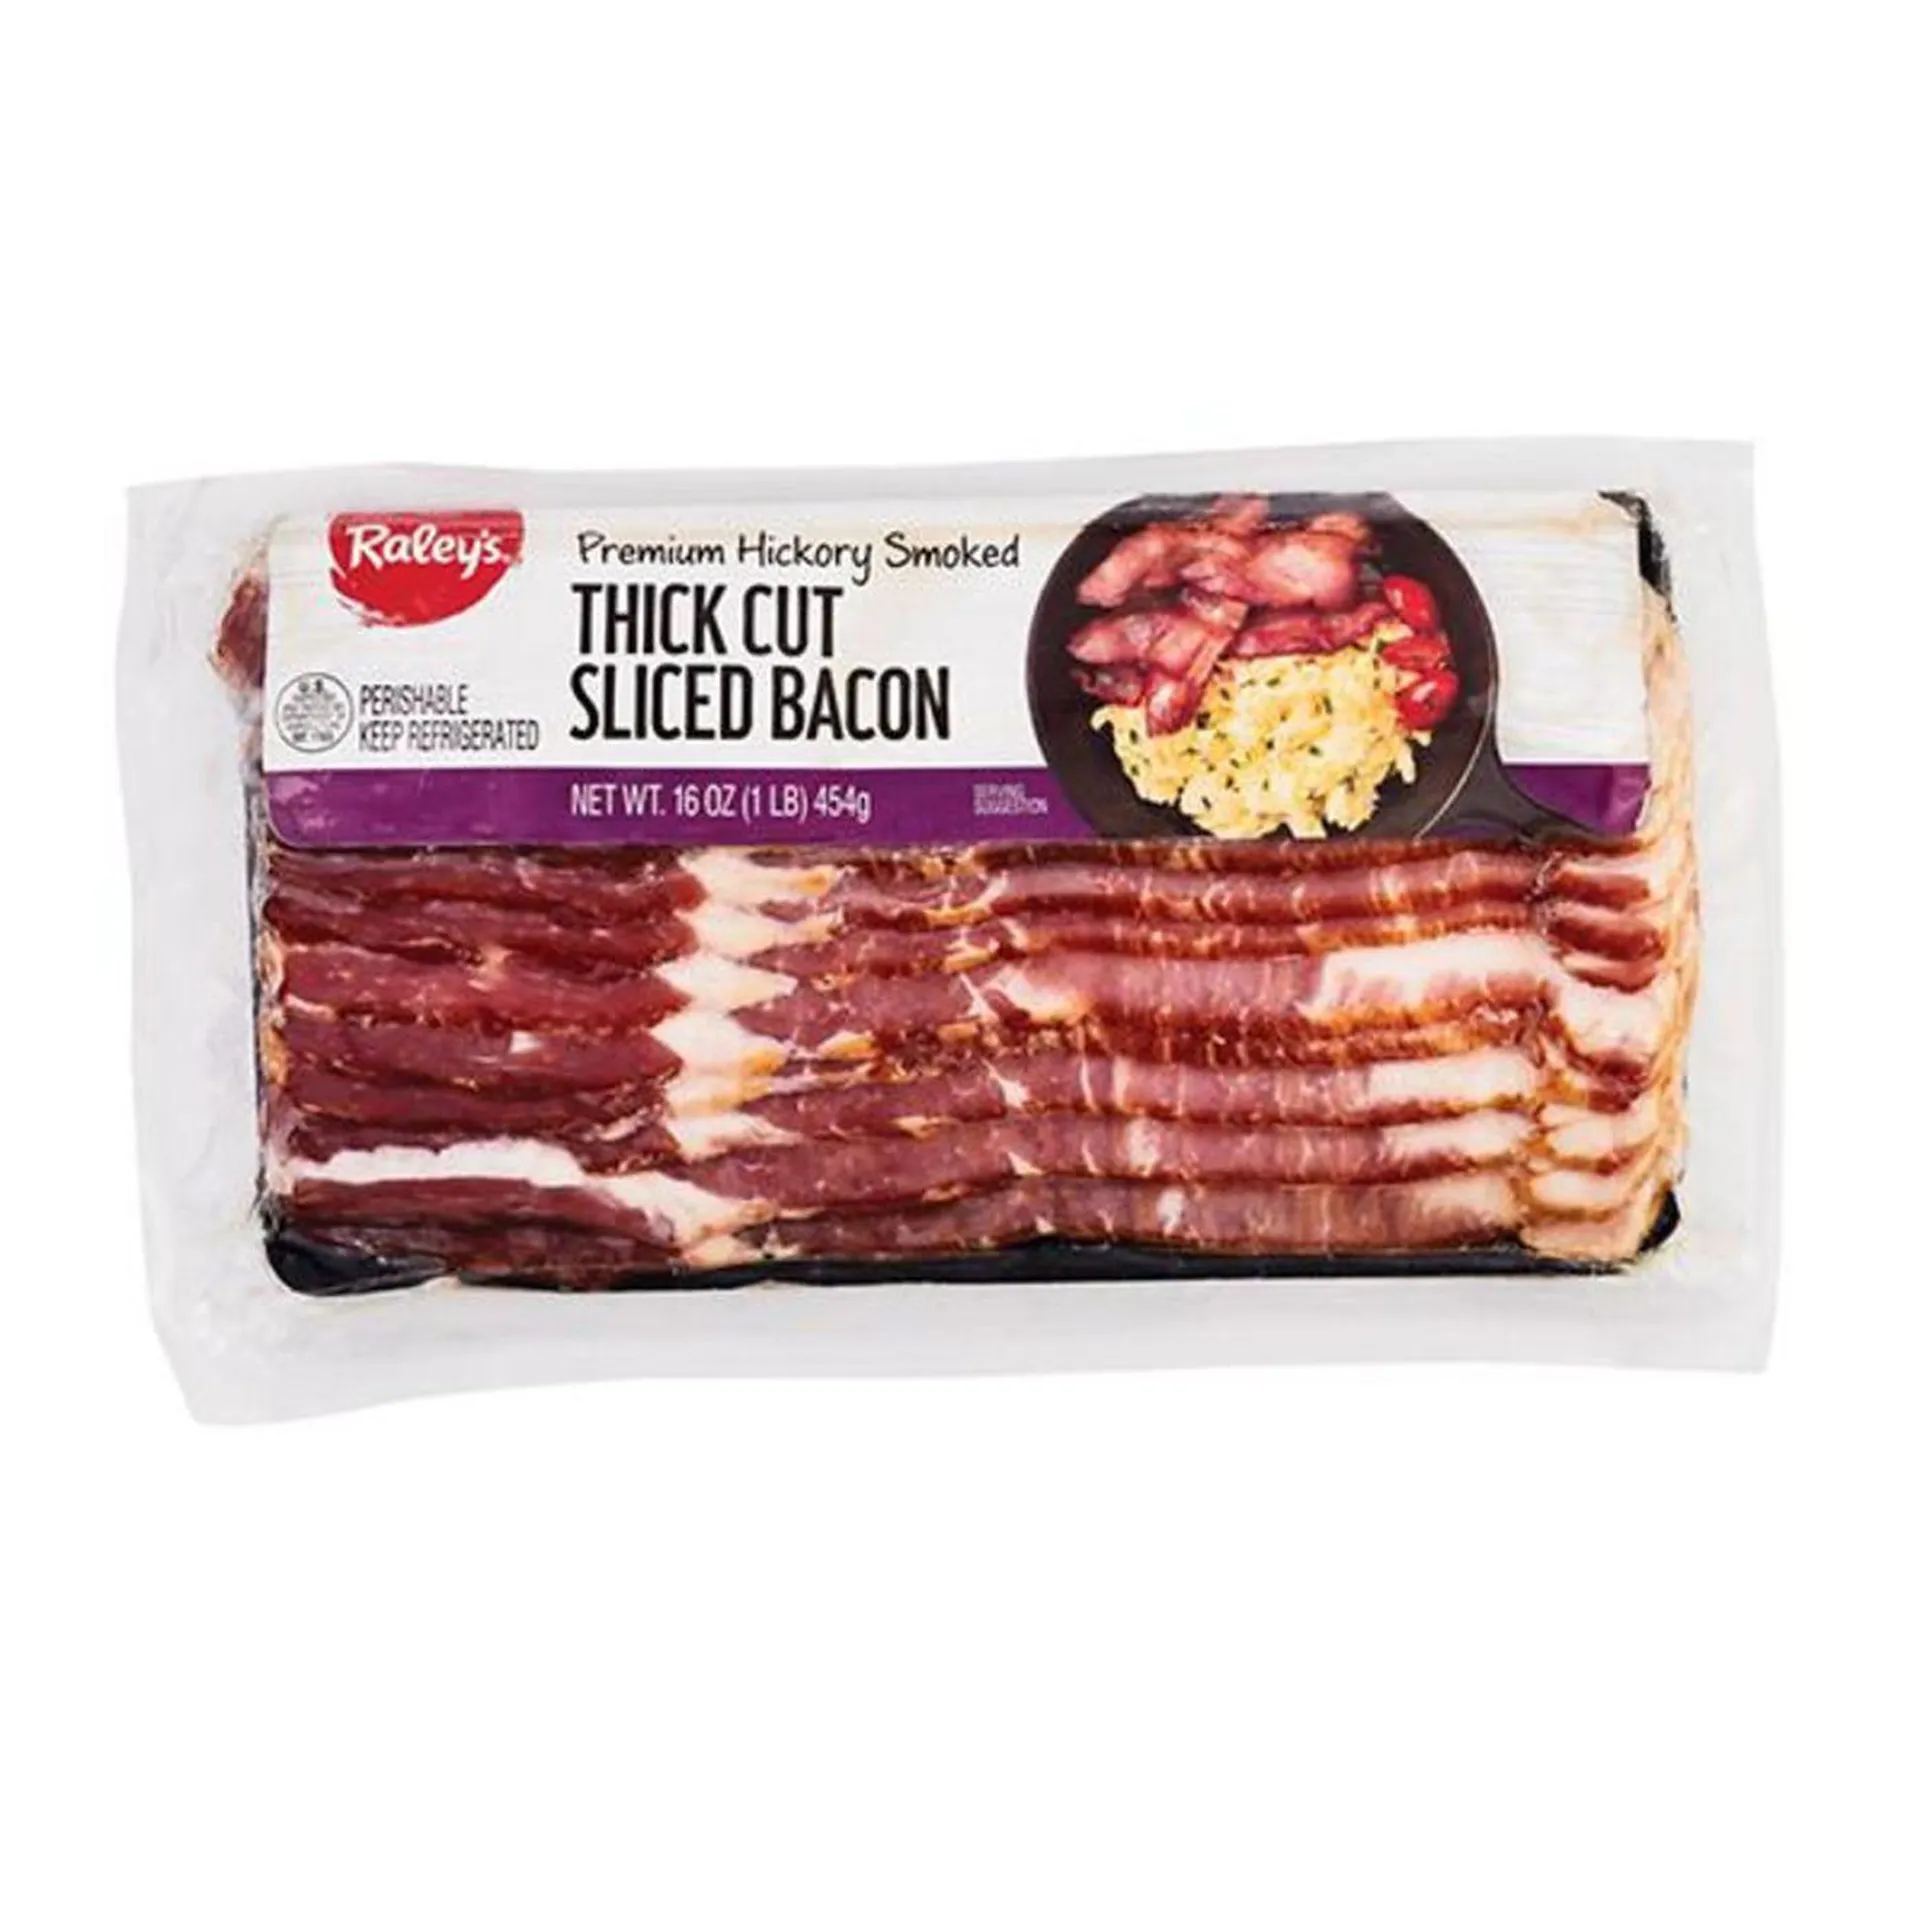 Raley's Premium Hickory Smoked Thick Cut Sliced Bacon